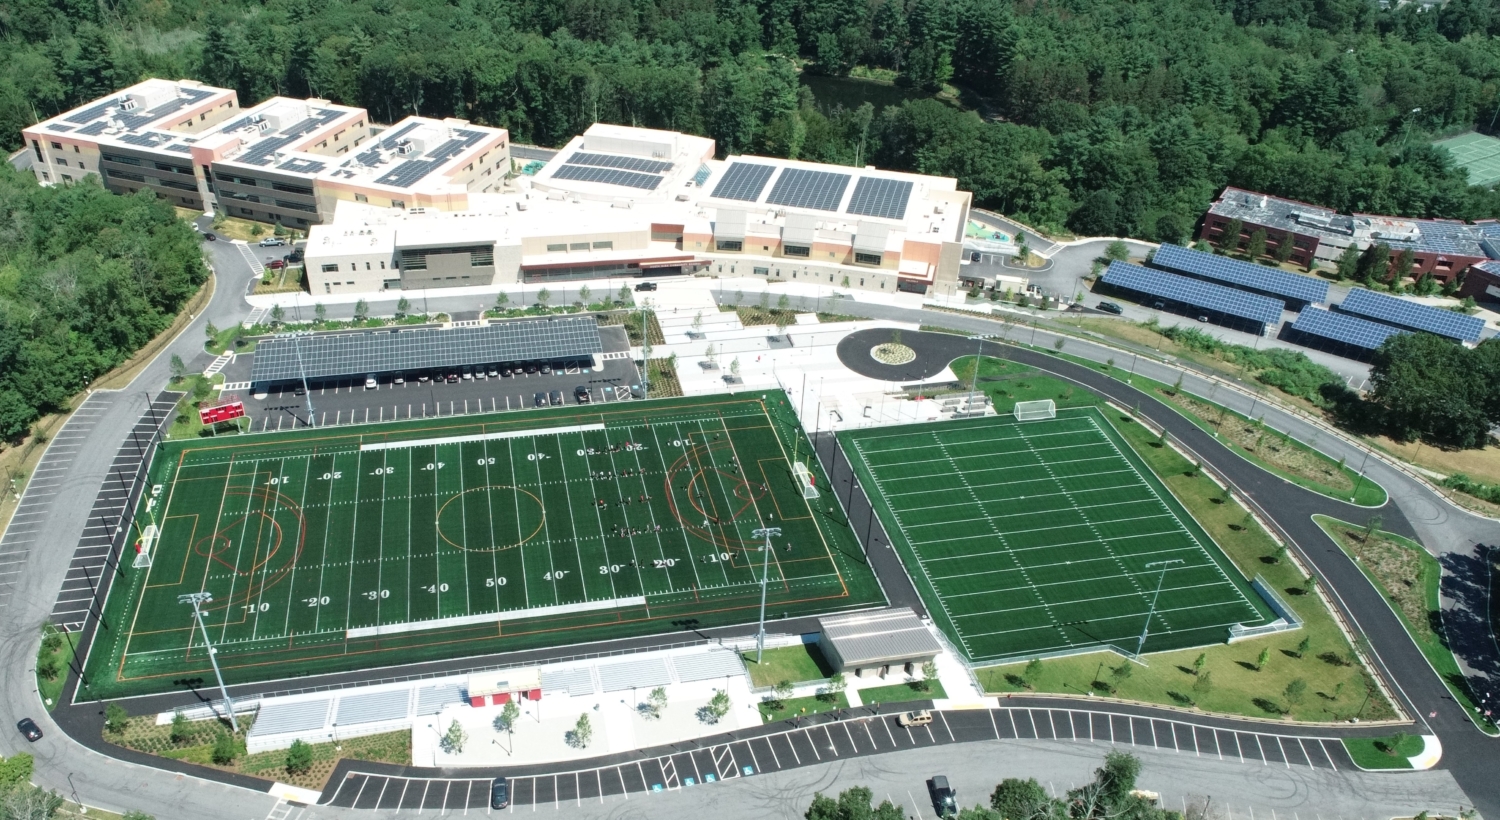 South High and sports fields seen from above